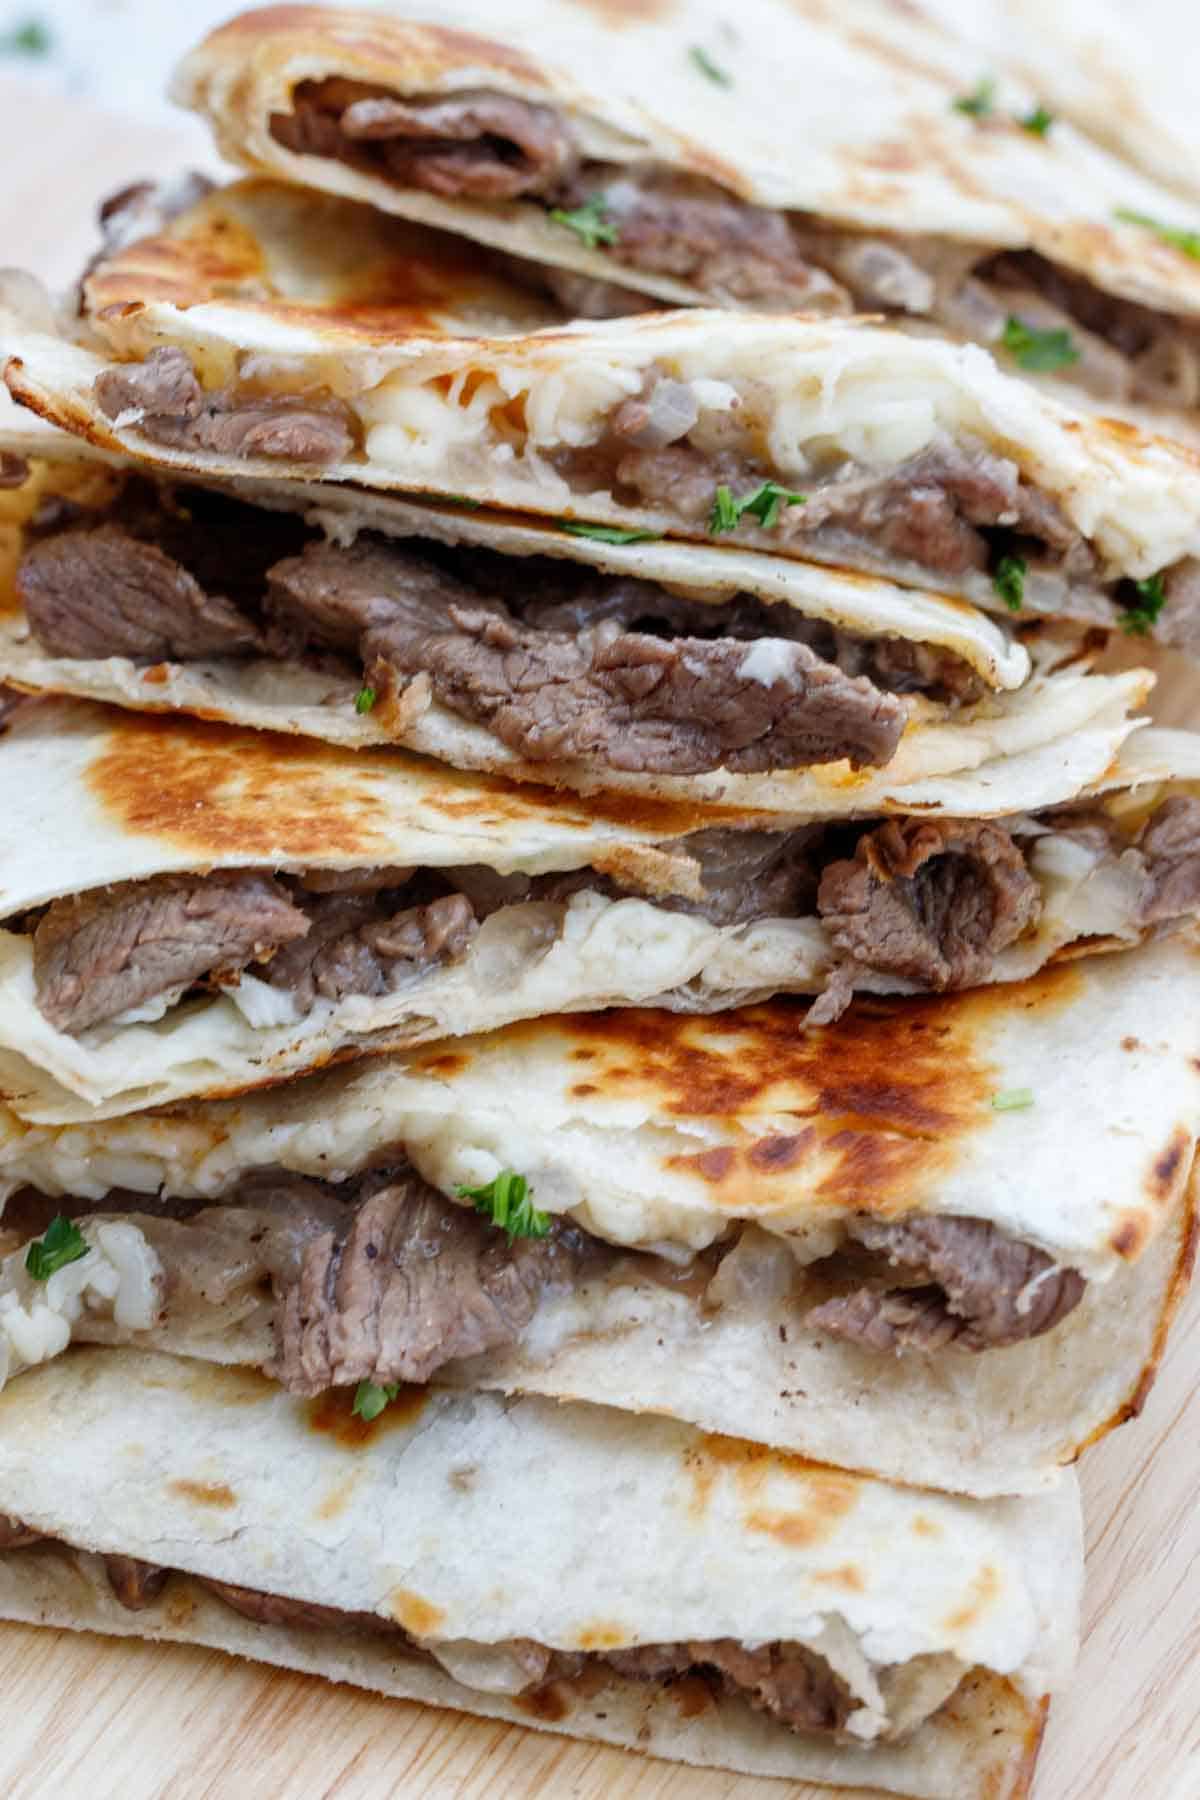 Quesadilla with steak cut into triangles stacked on a plate.